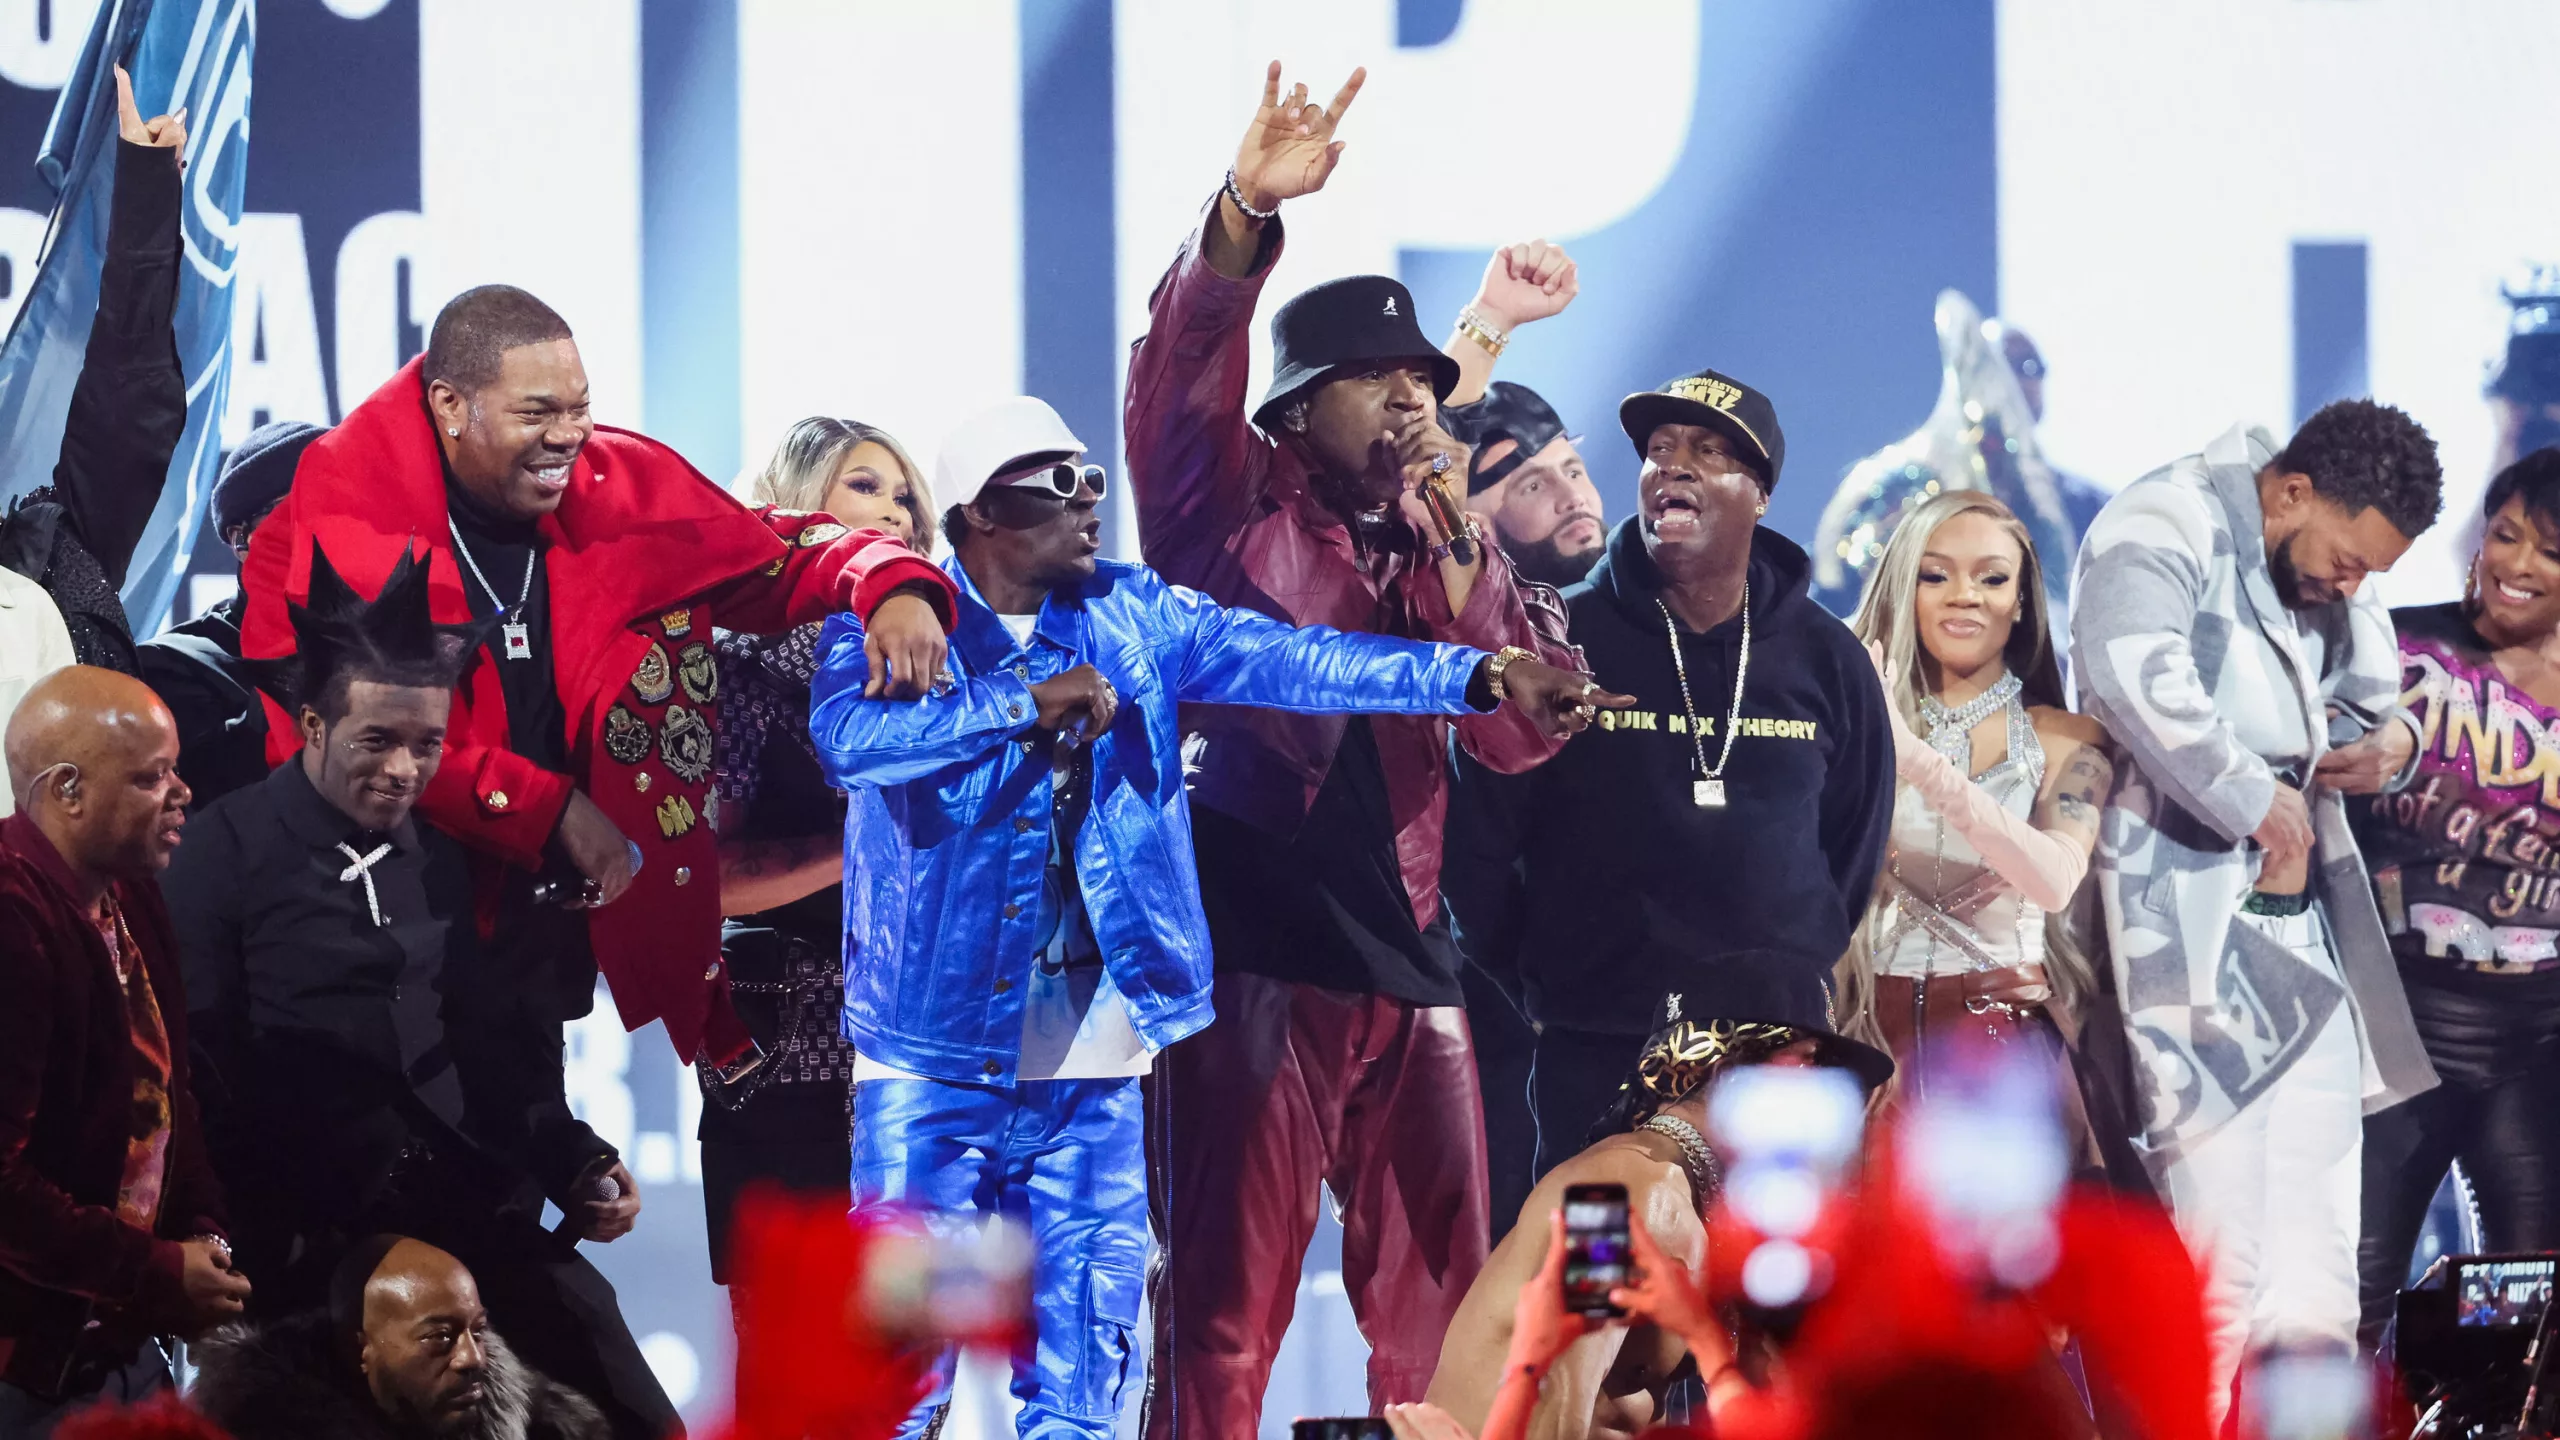 You are currently viewing Pioneer Hip Hop Group Not Included in Epic Grammy’s Performance